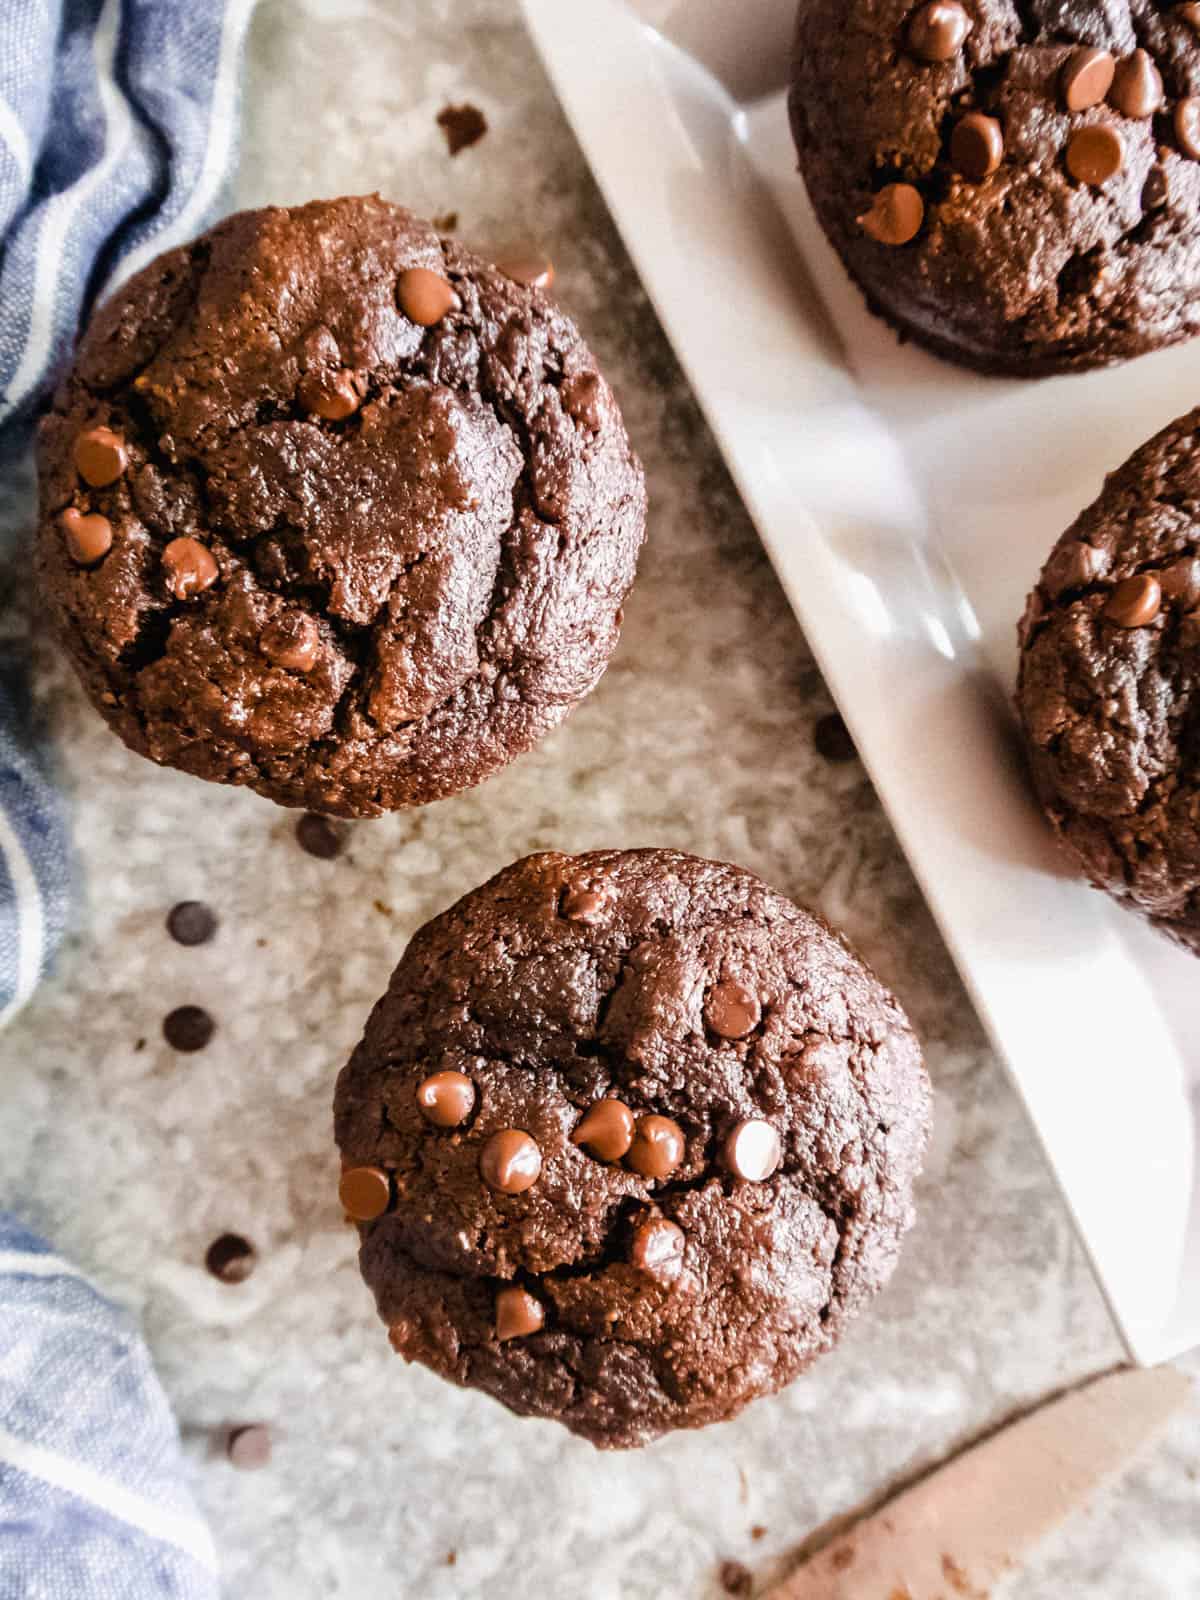 A table full of chocolate paleo muffins.